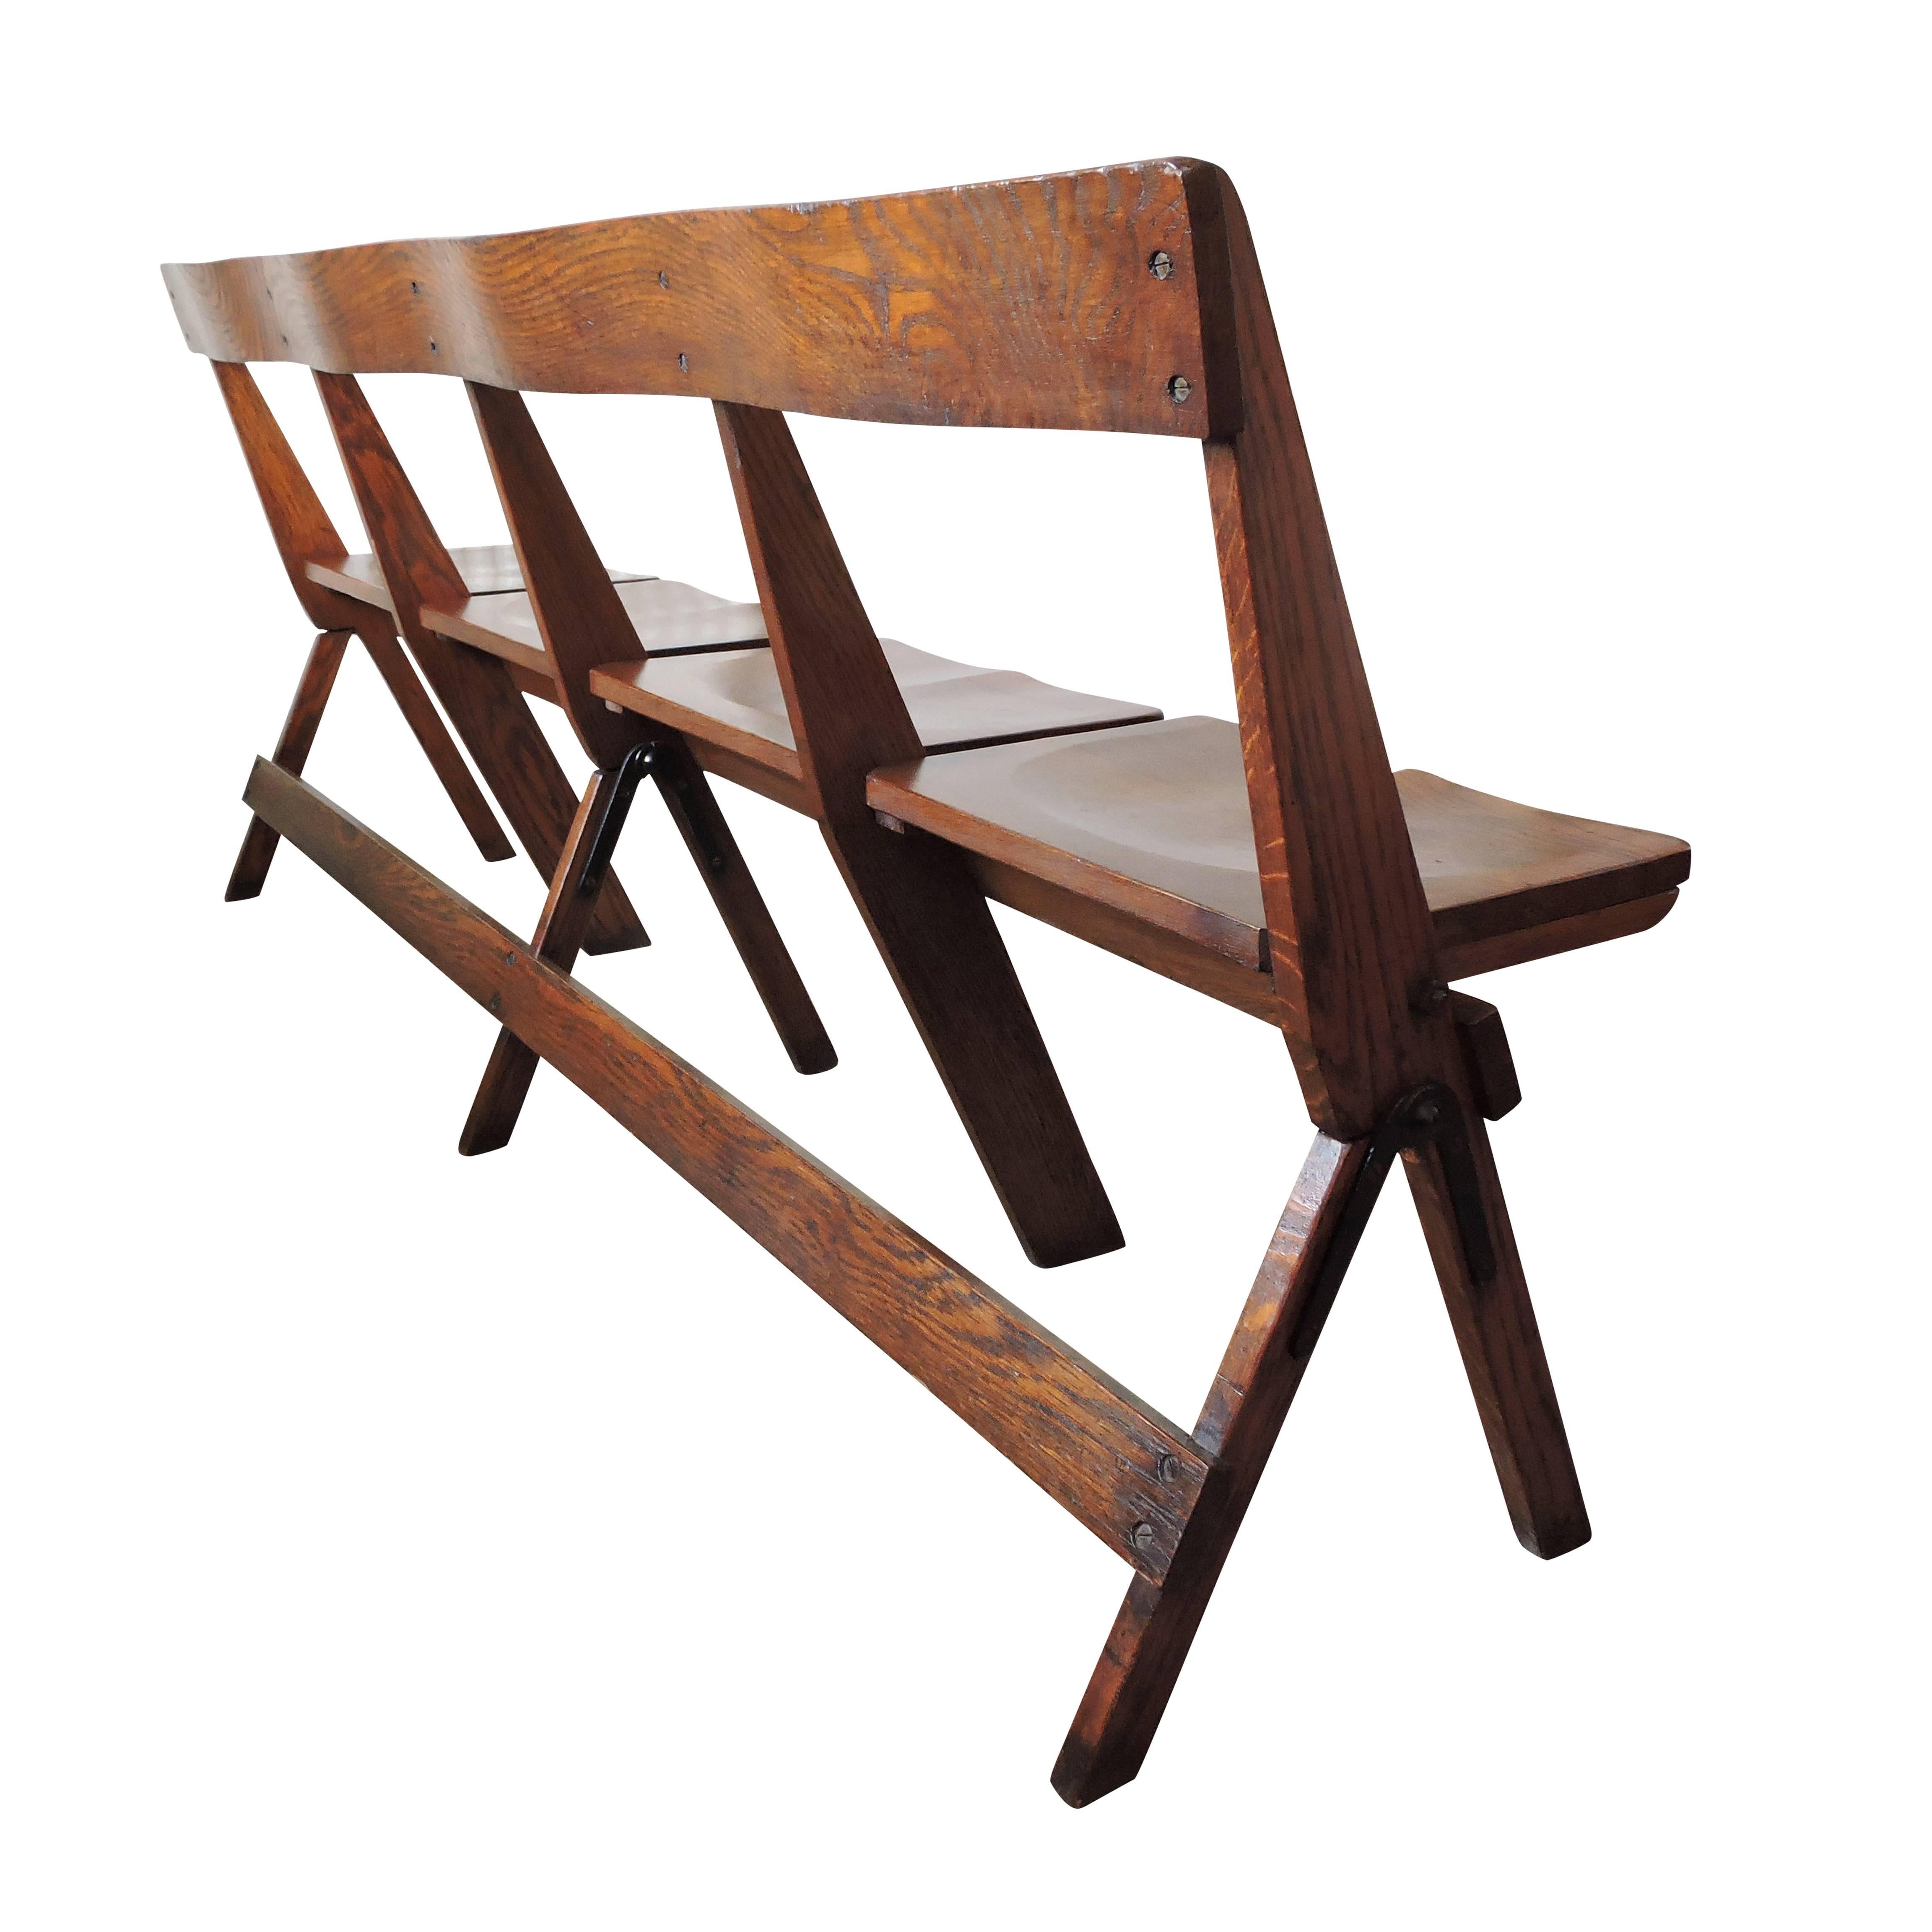 This set of four conjoined oak folding chapel chairs features individually folding solid seats.